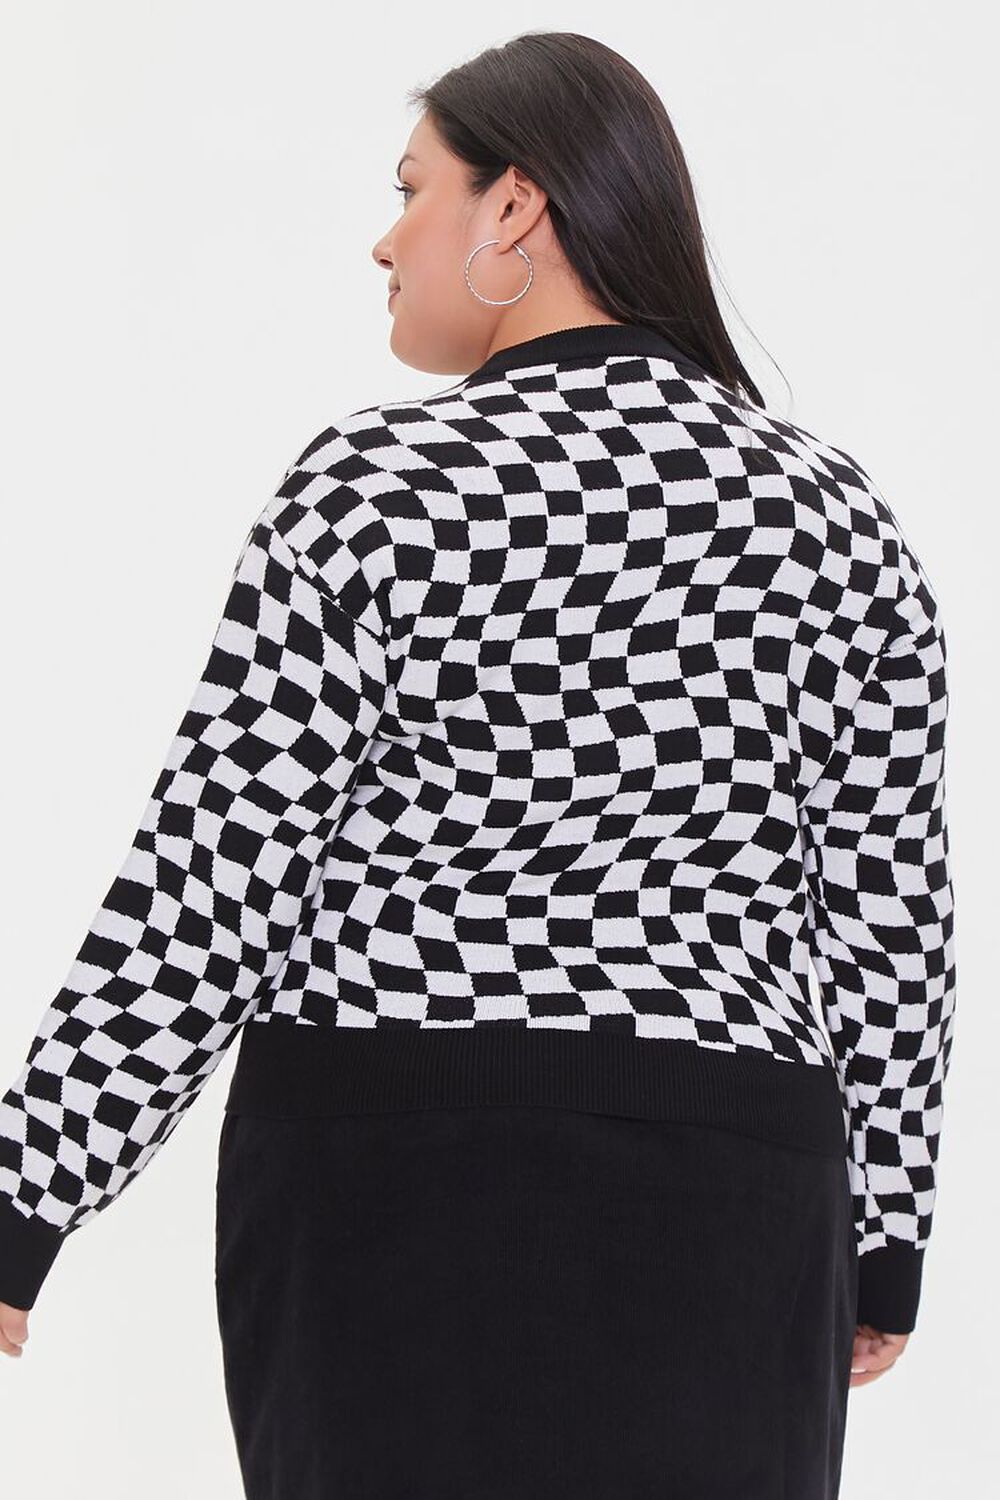 Plus Size Checkered Sweater, image 3